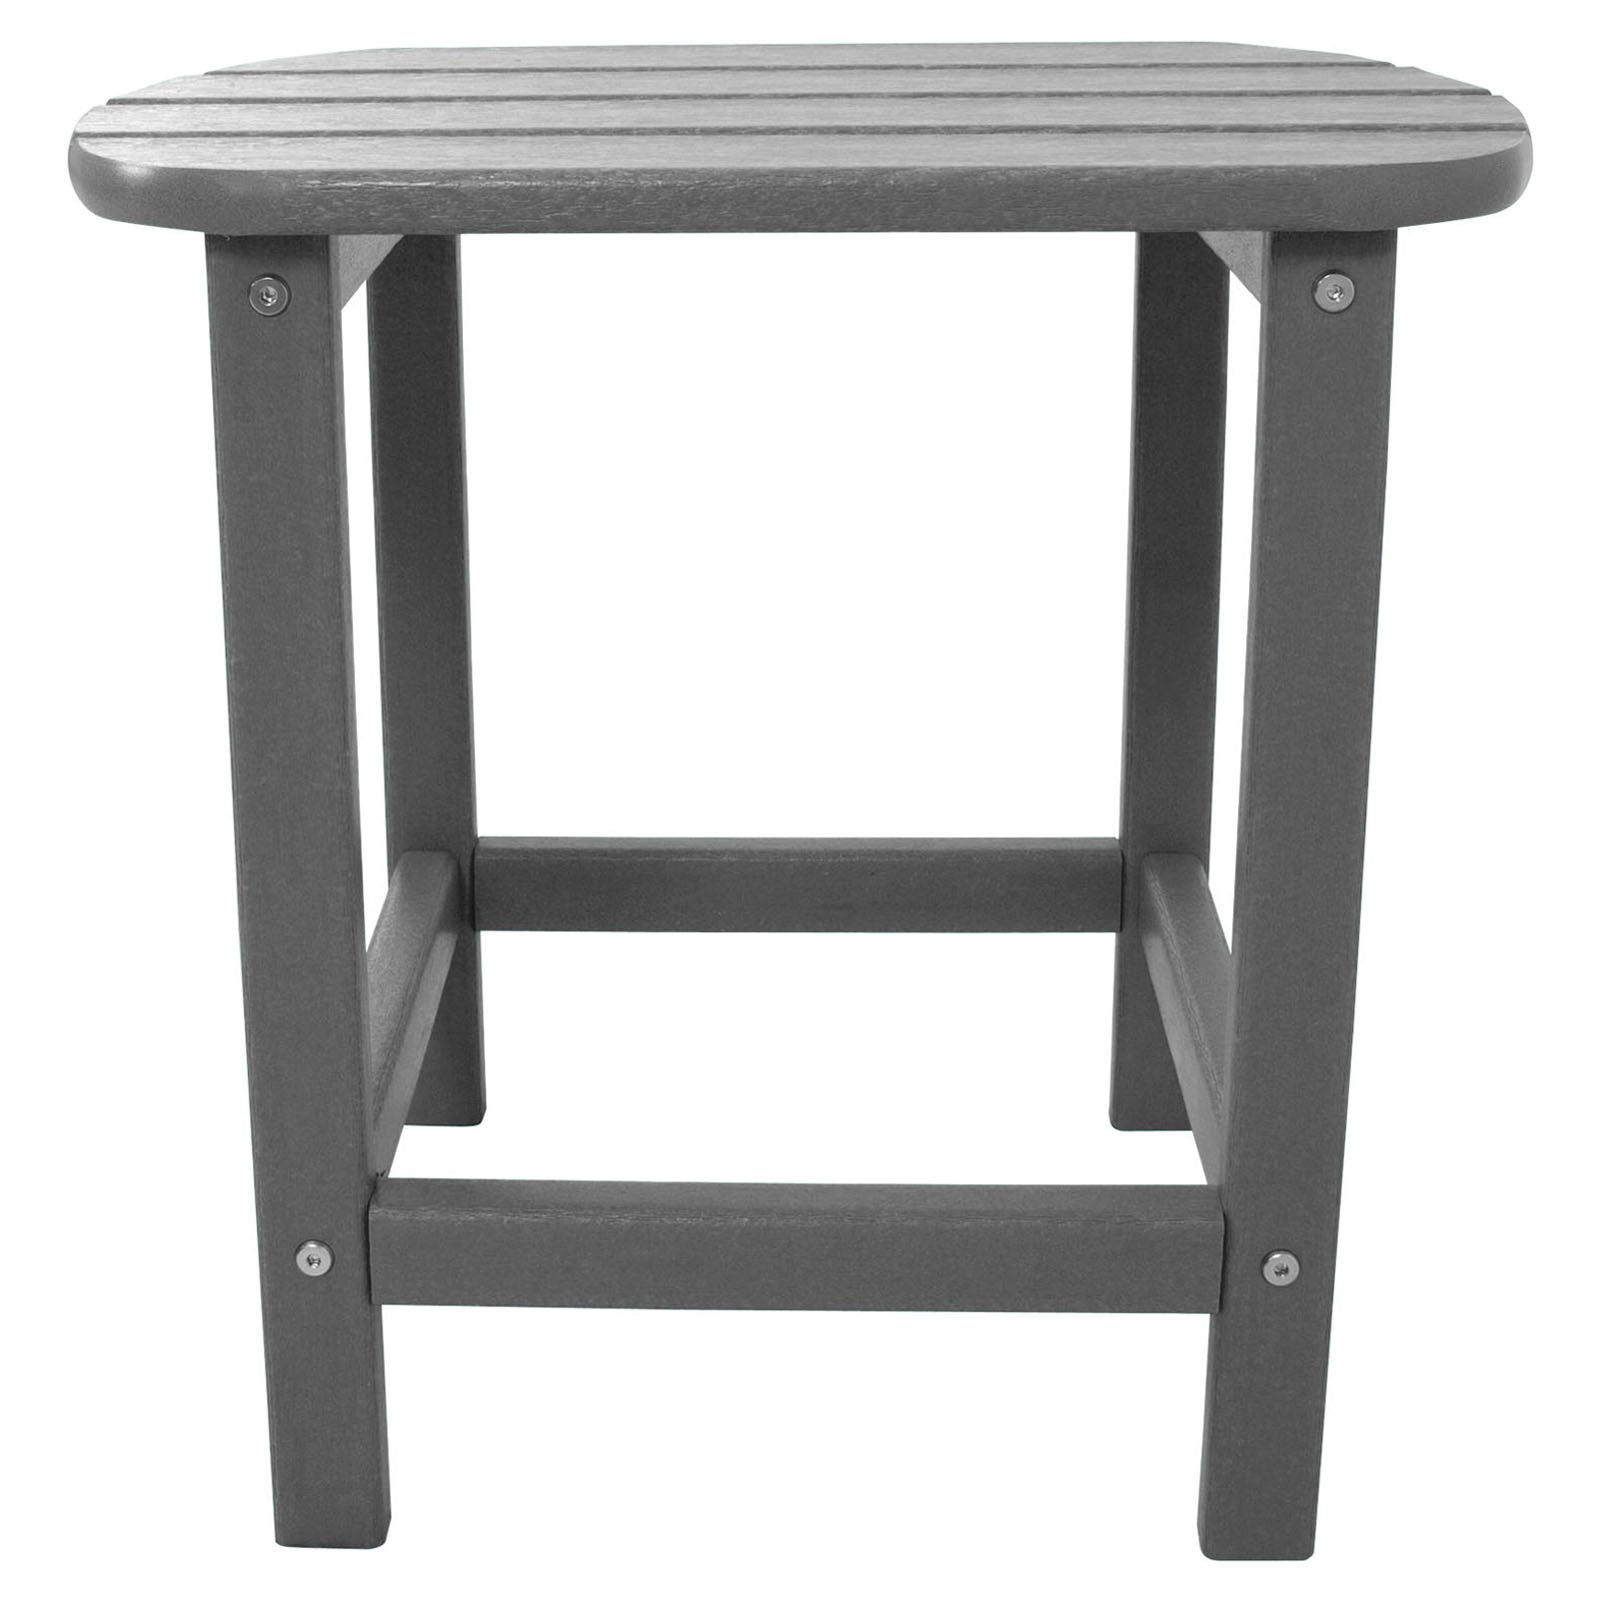 Hanover Outdoor All-Weather Side Table - image 3 of 11